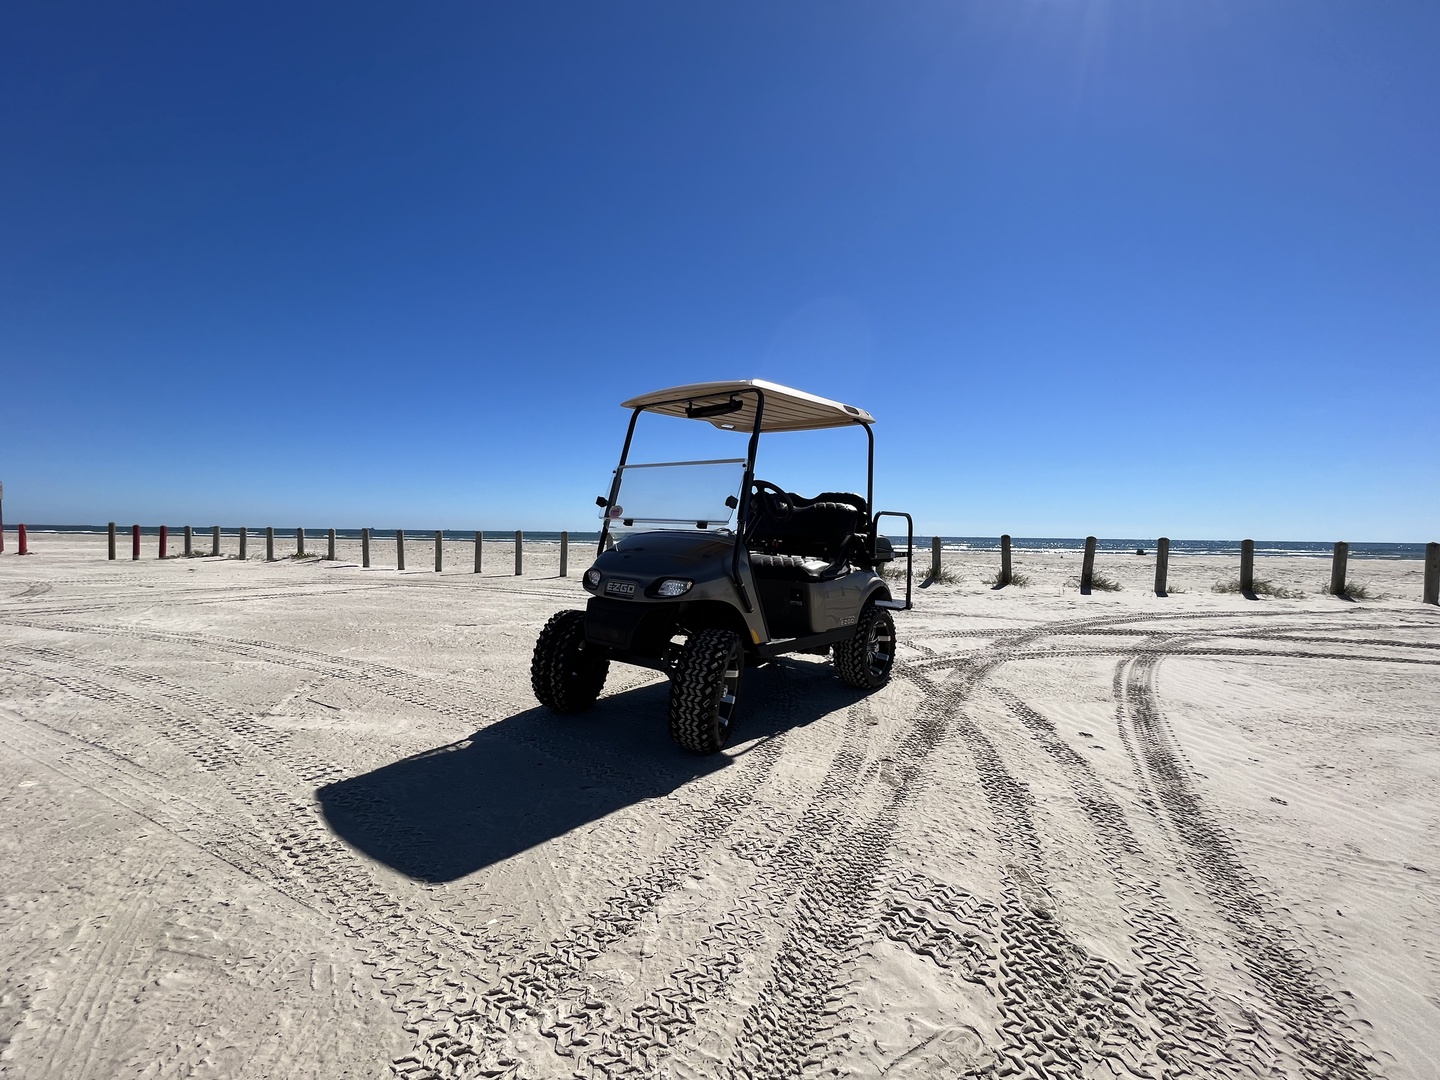 Golf cart included in rental